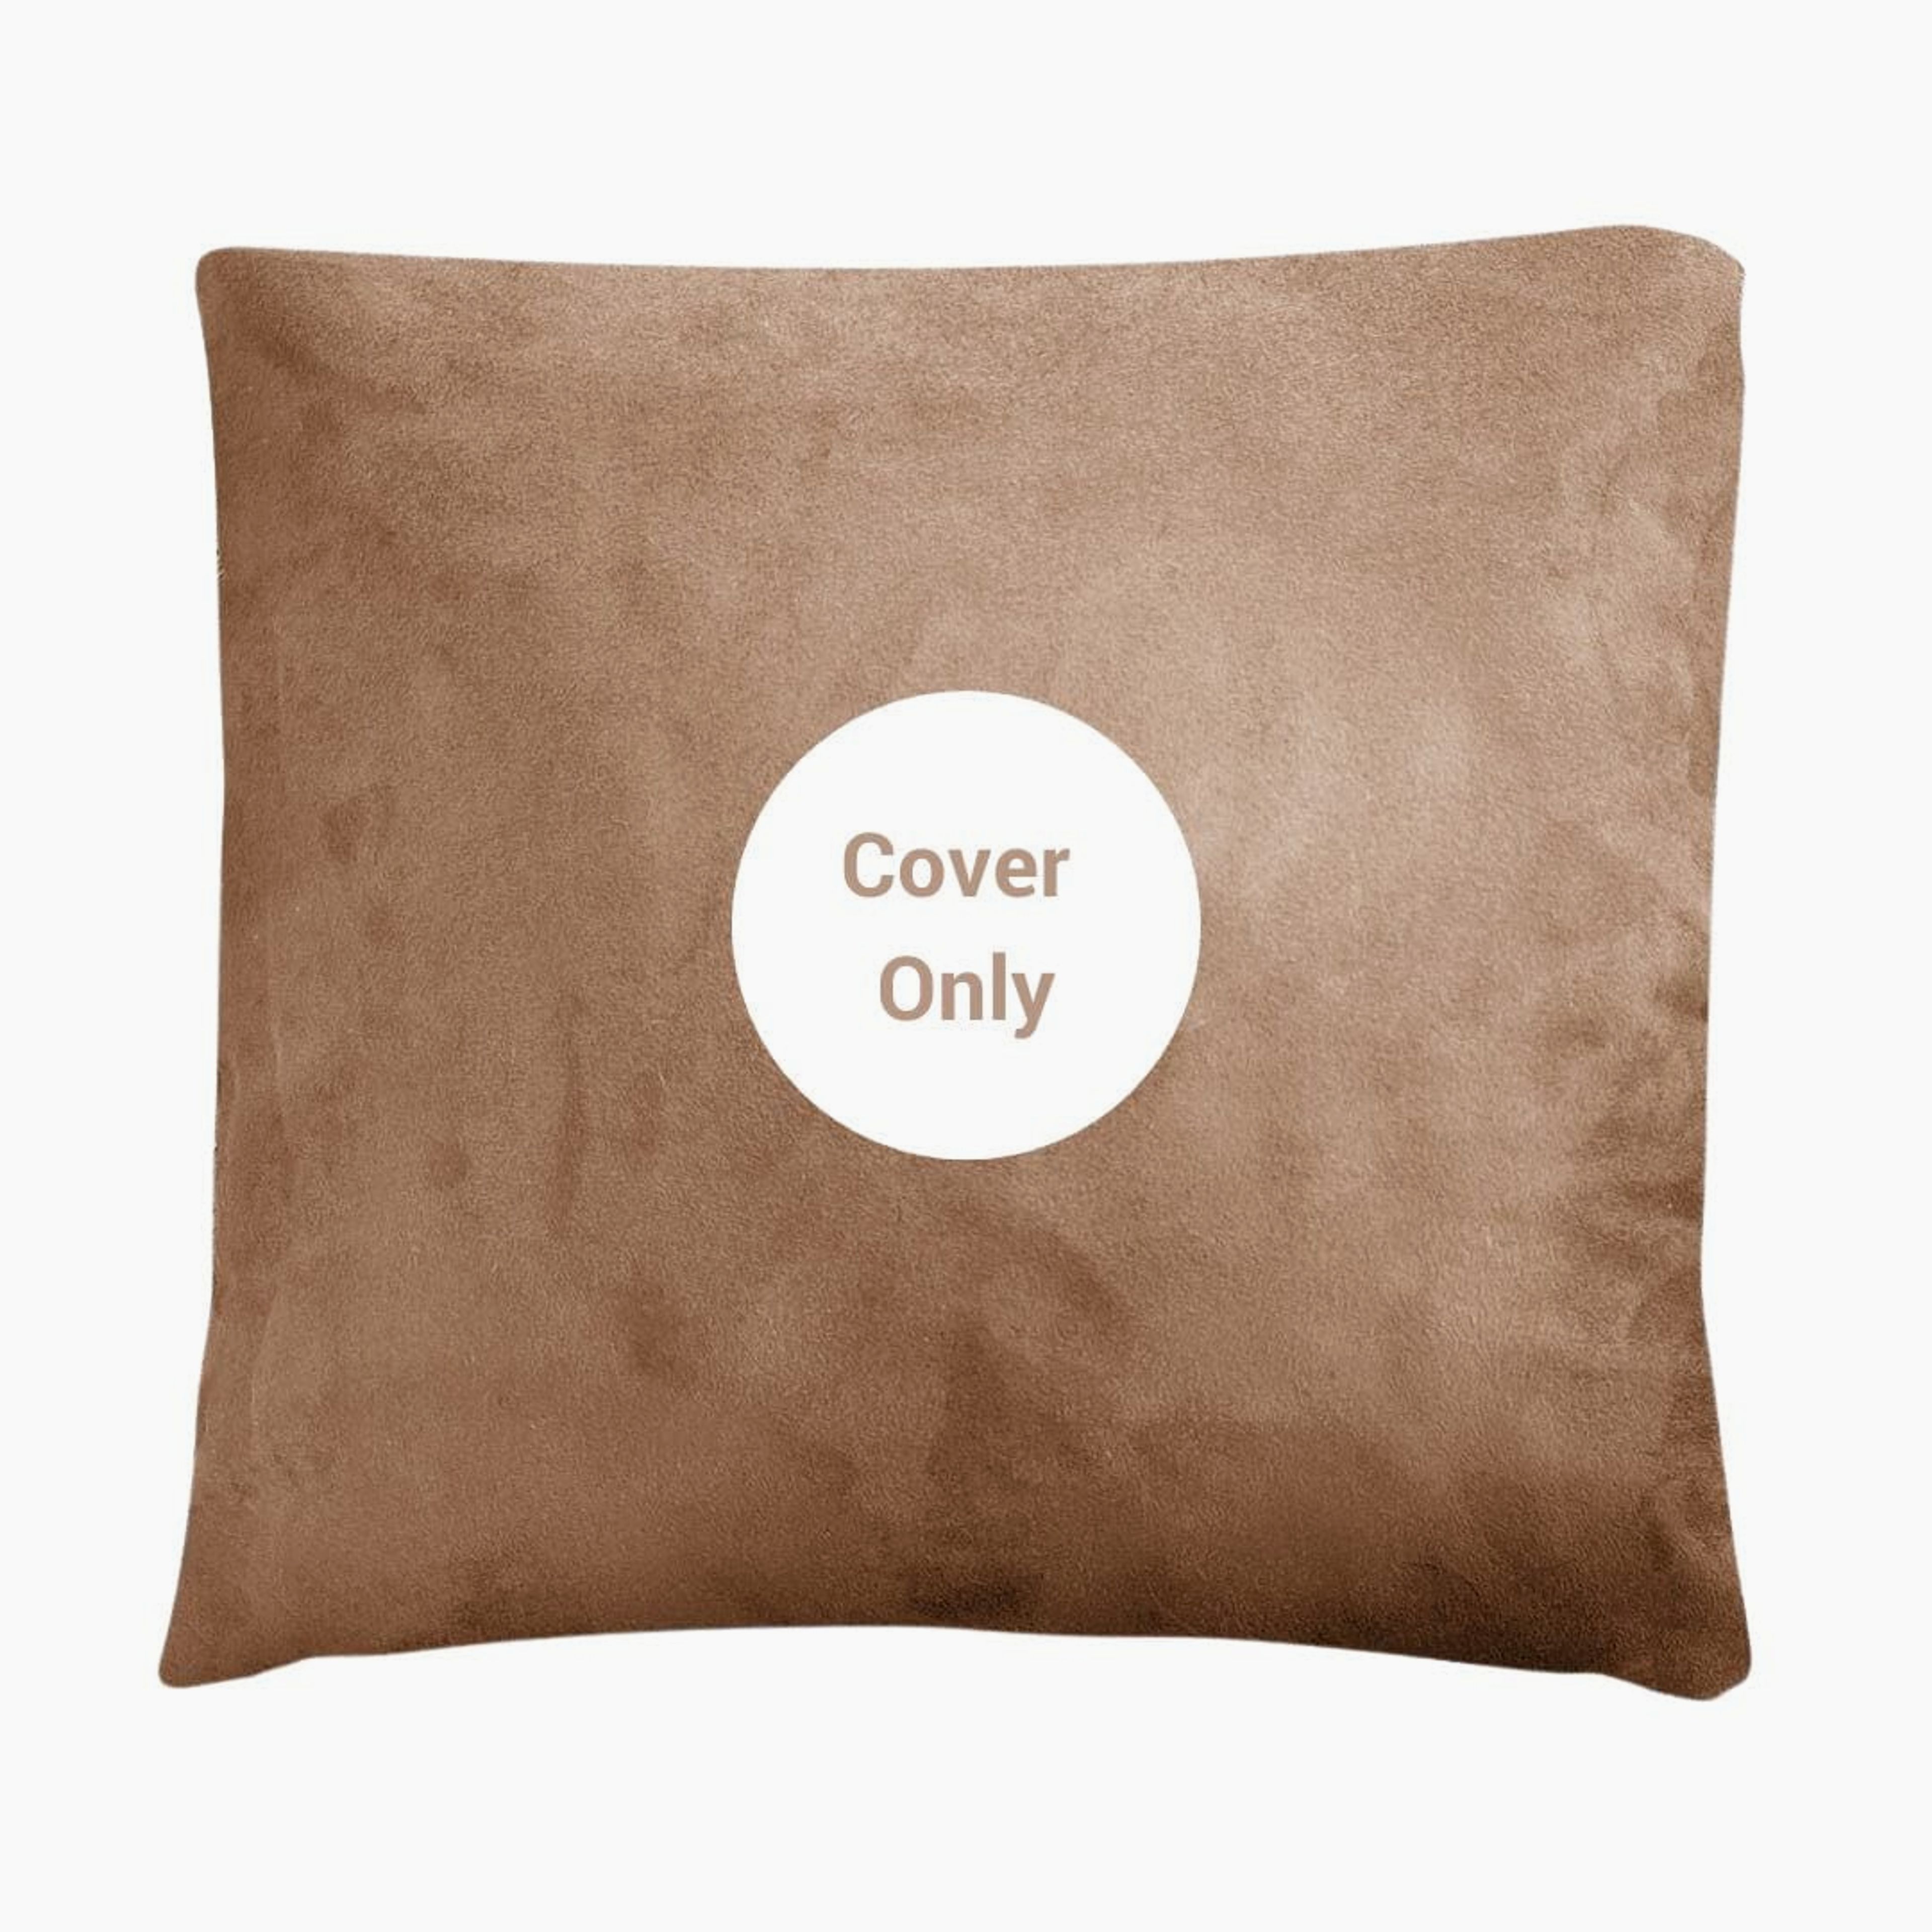 18" Throw Pillow - Replacement Cover